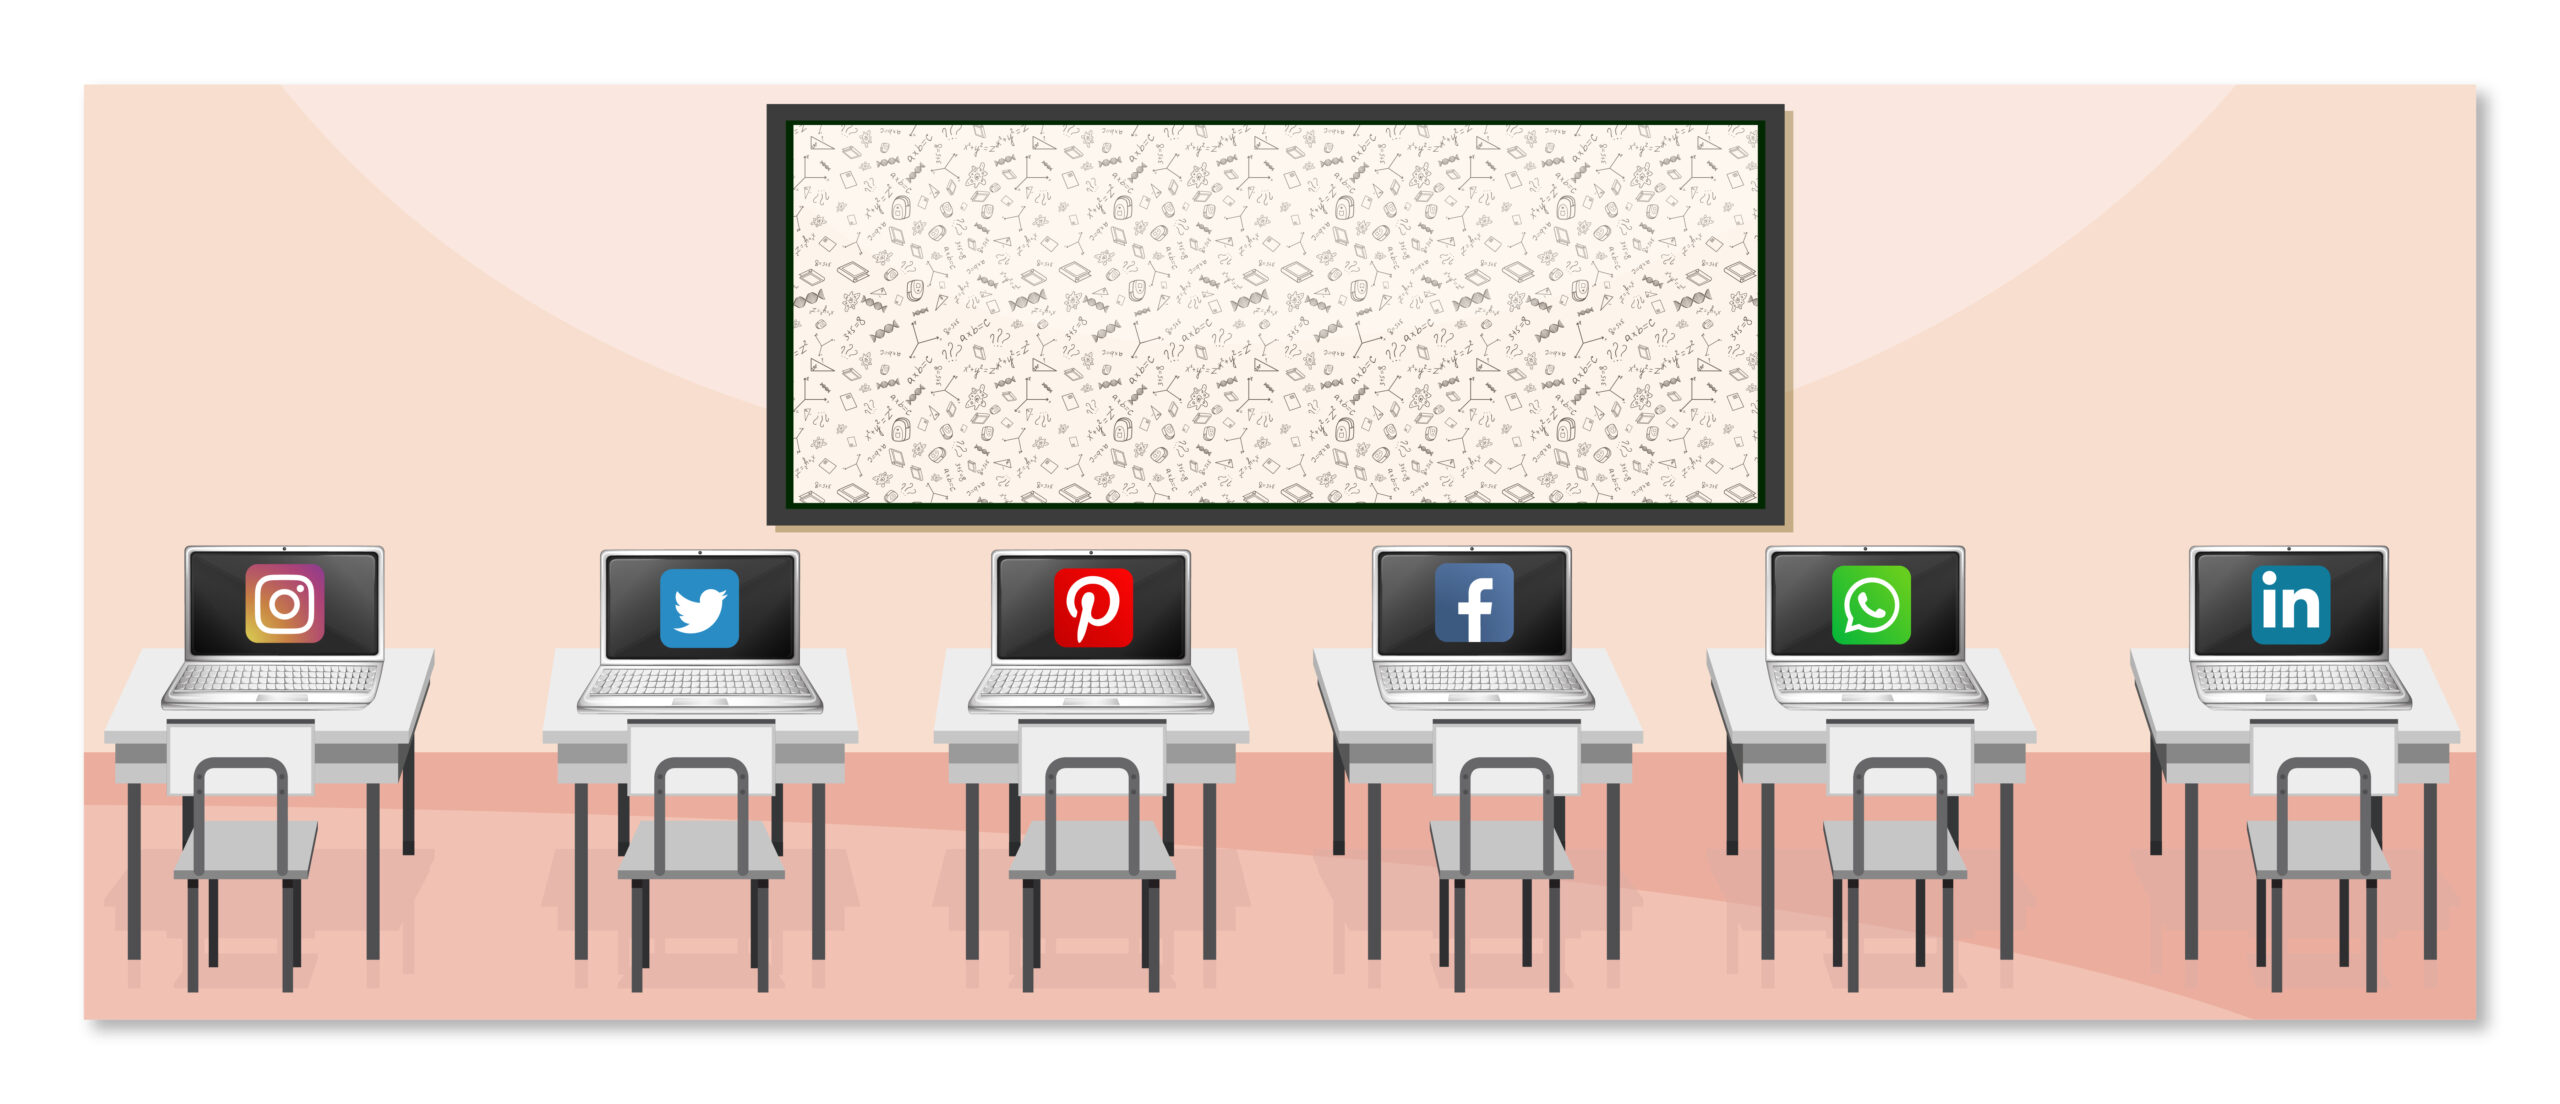 Role of Social Media in Education